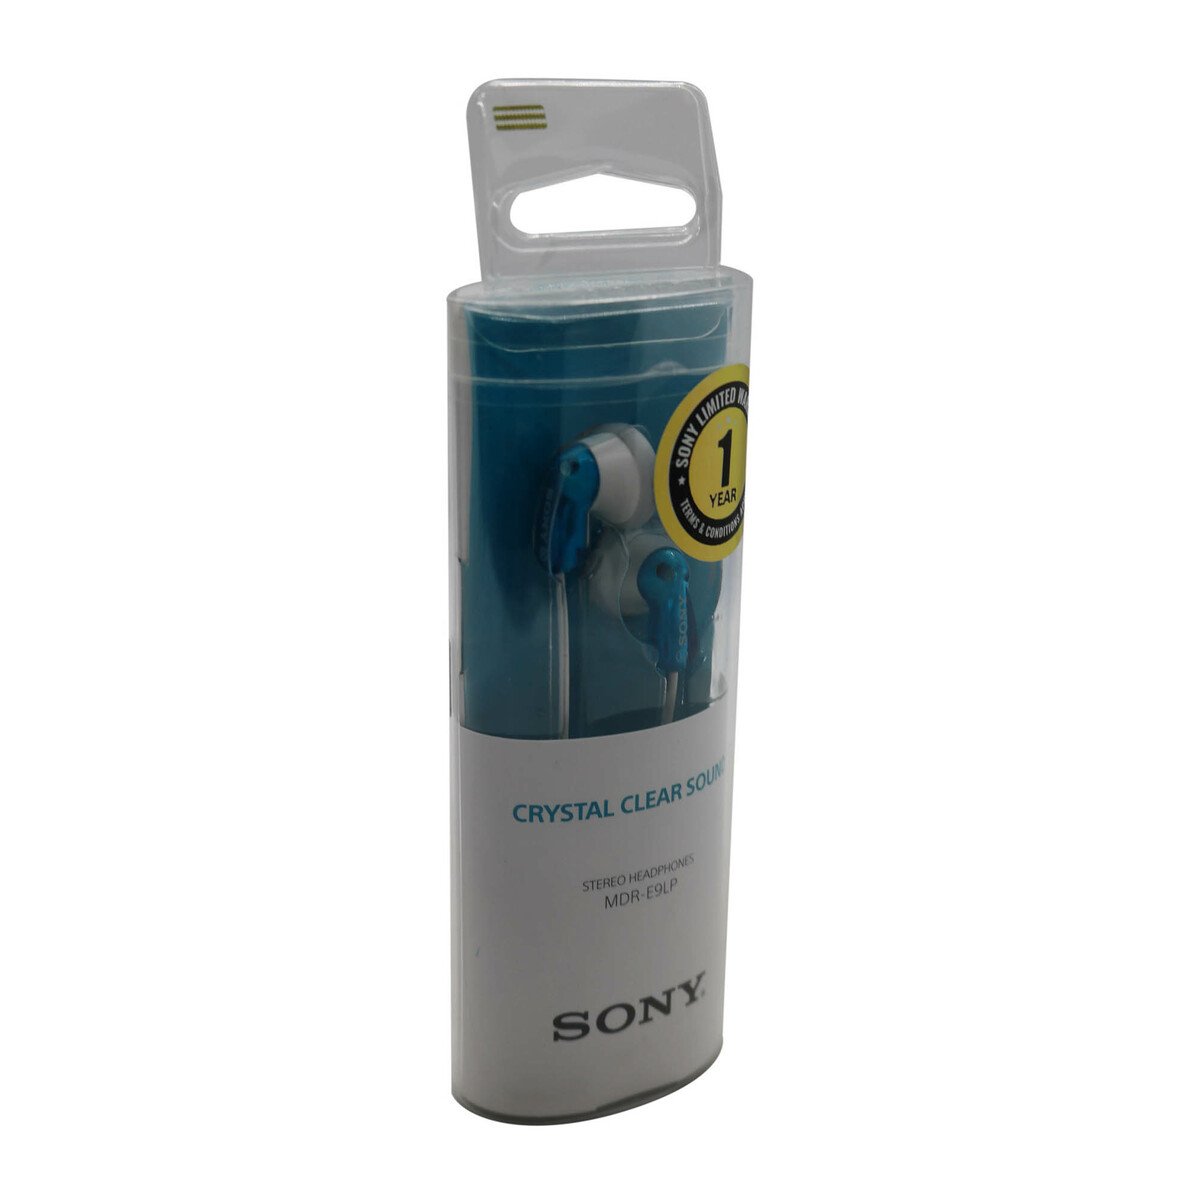 Sony Ear Phone MDR-E9LP/LCE